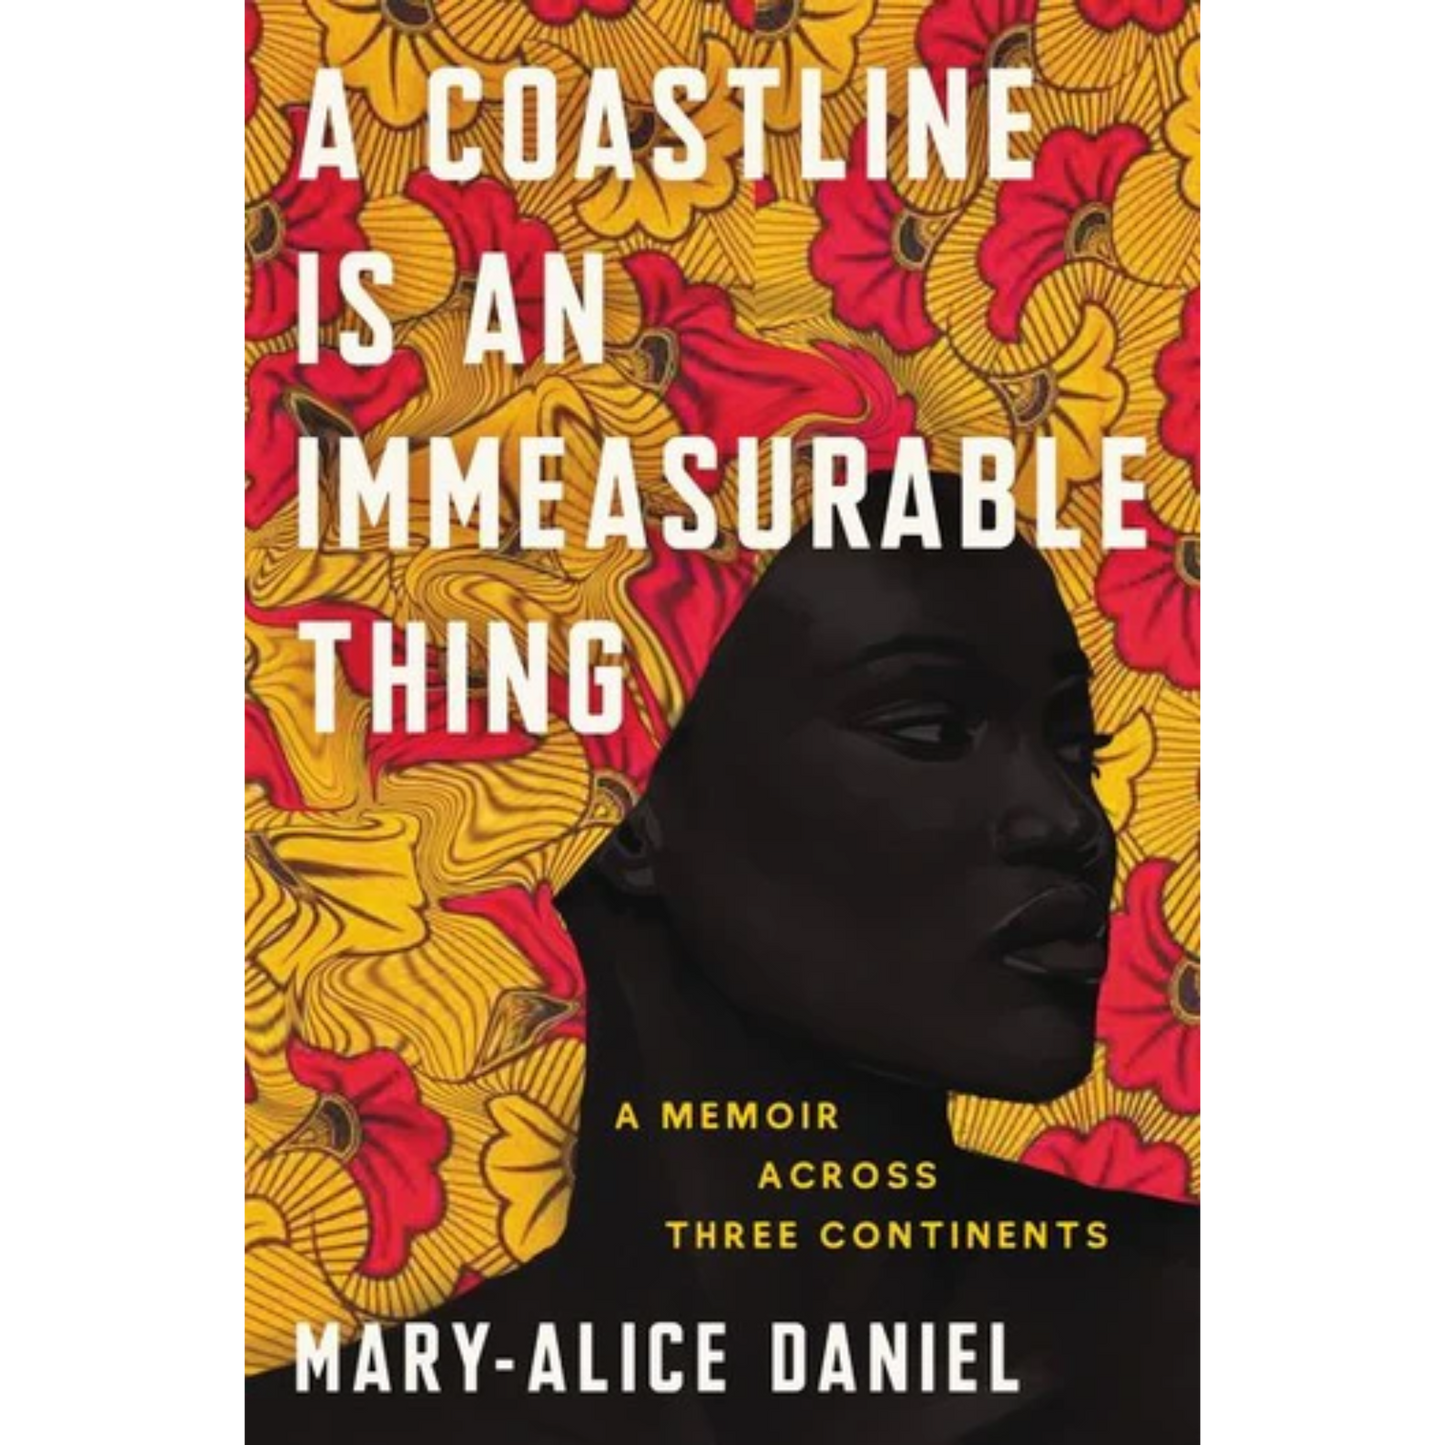 a coastline is an immeasurable thing mary alice daniel